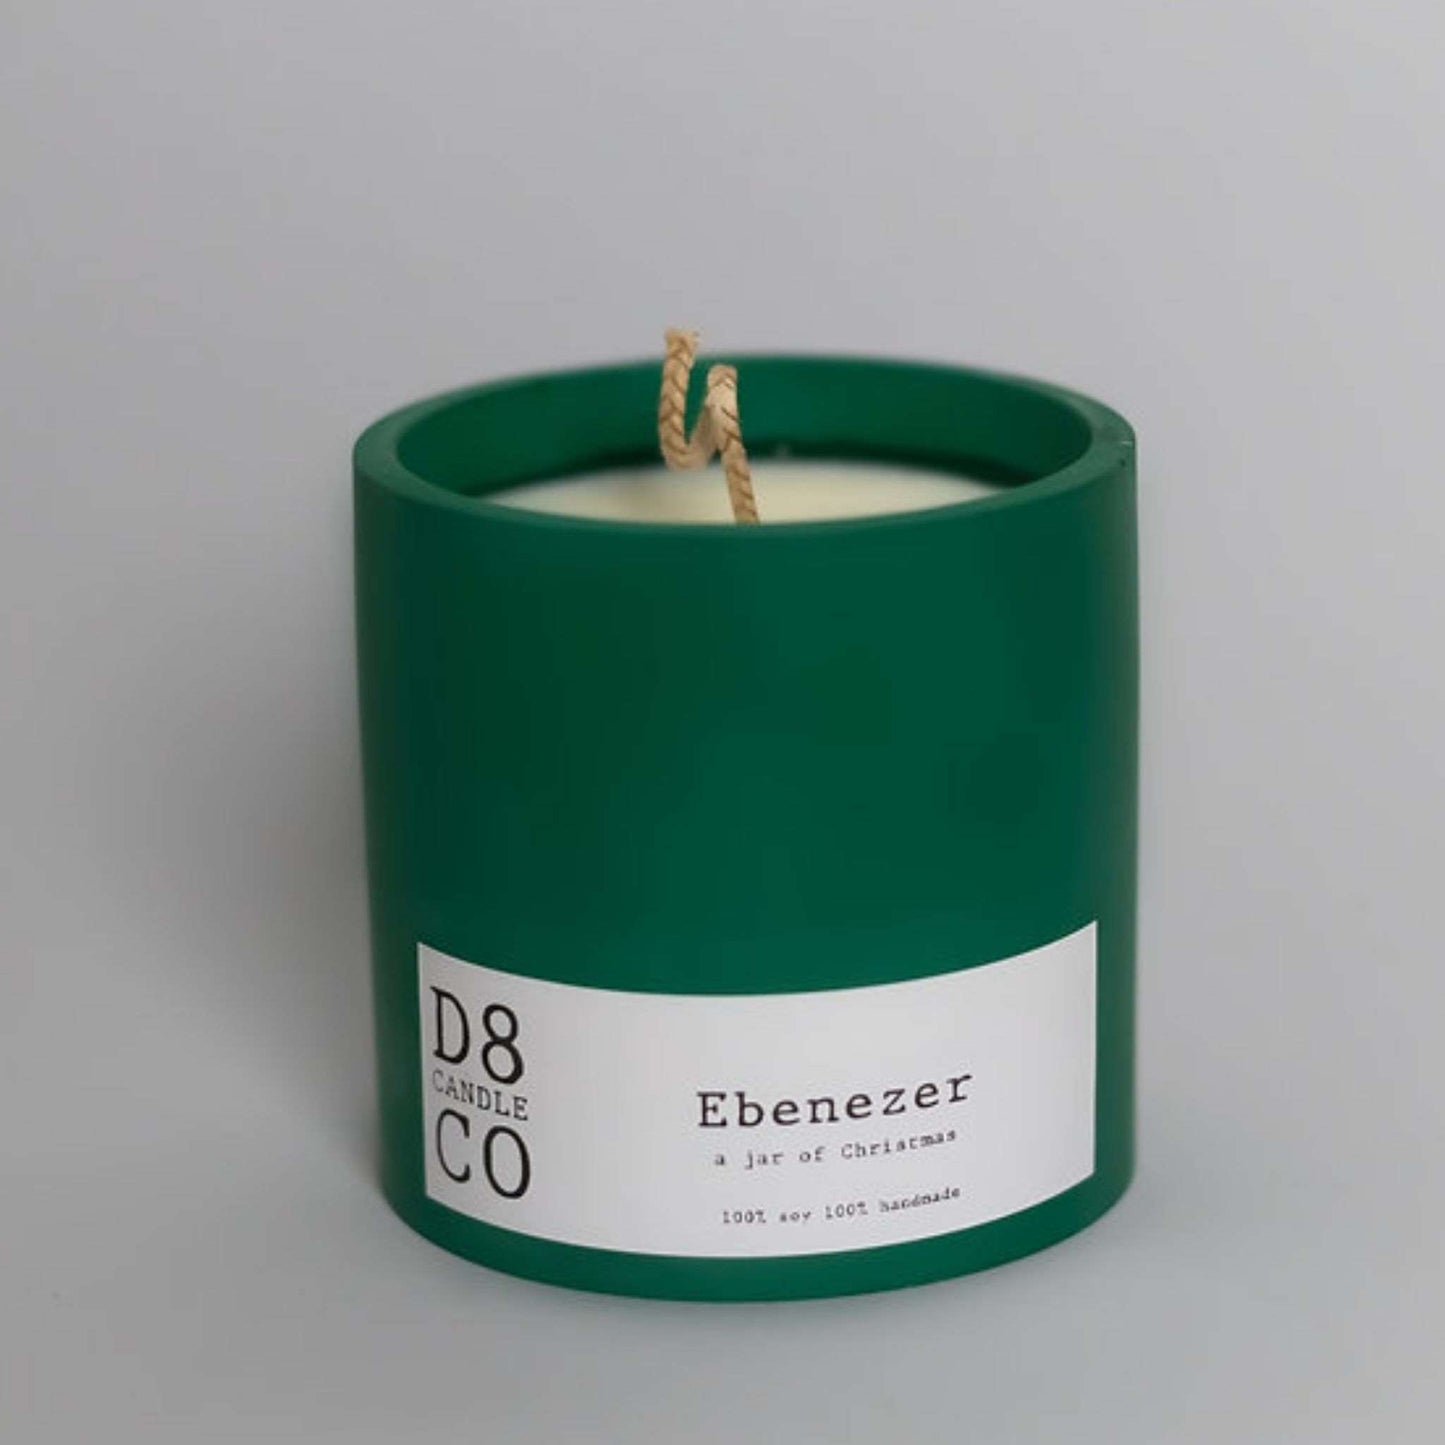 D8 Candle Co. Candles Ebenezer Christmas Candle - D8 Candle Co.